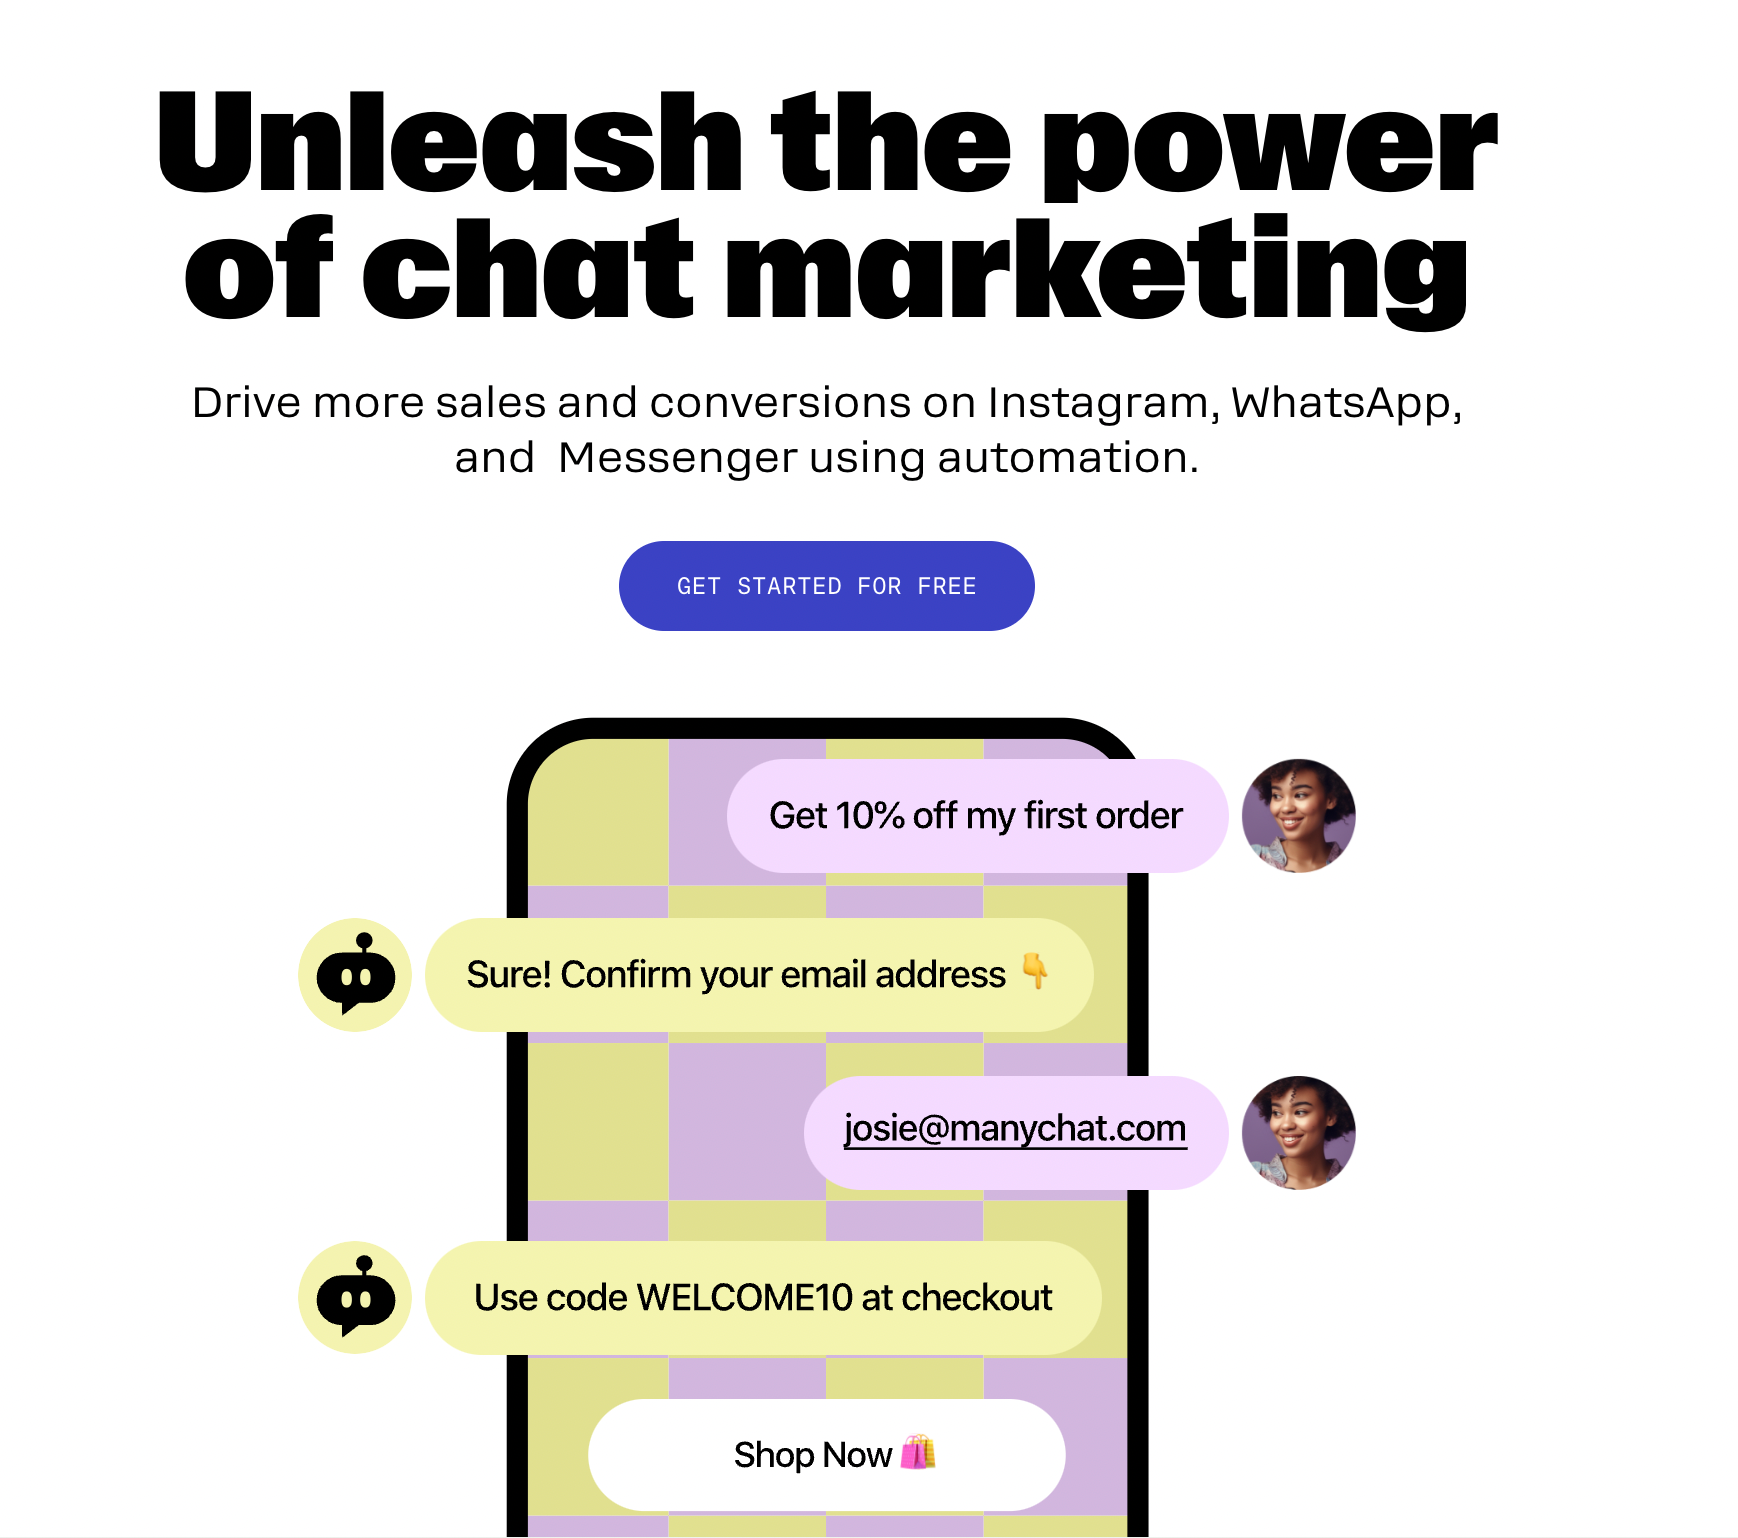 ManyChat "Unleash the power of chat marketing"